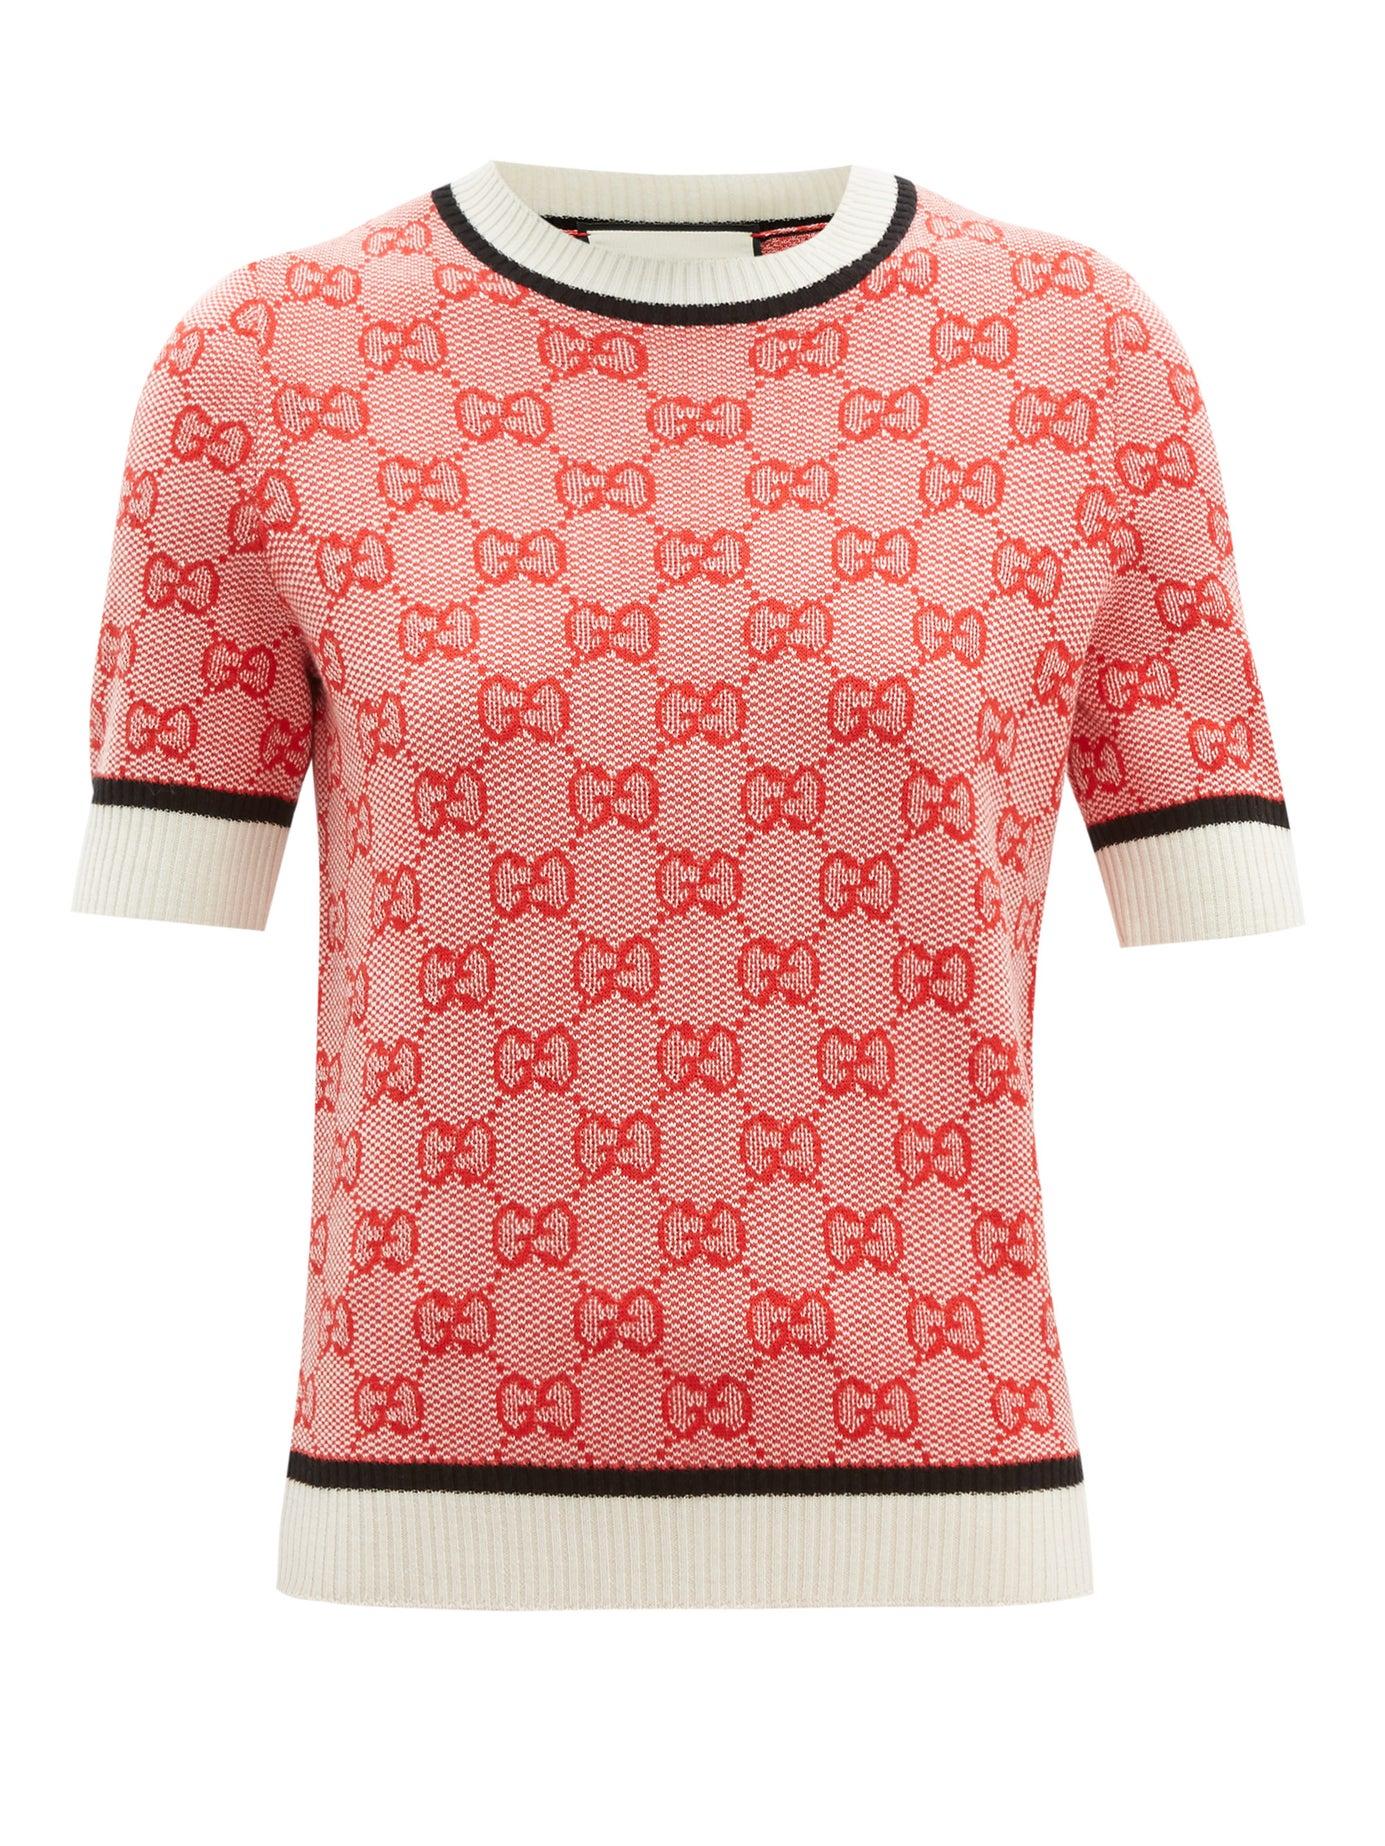 Gucci Wool GG Knit Top in Red/White (Red) - Lyst